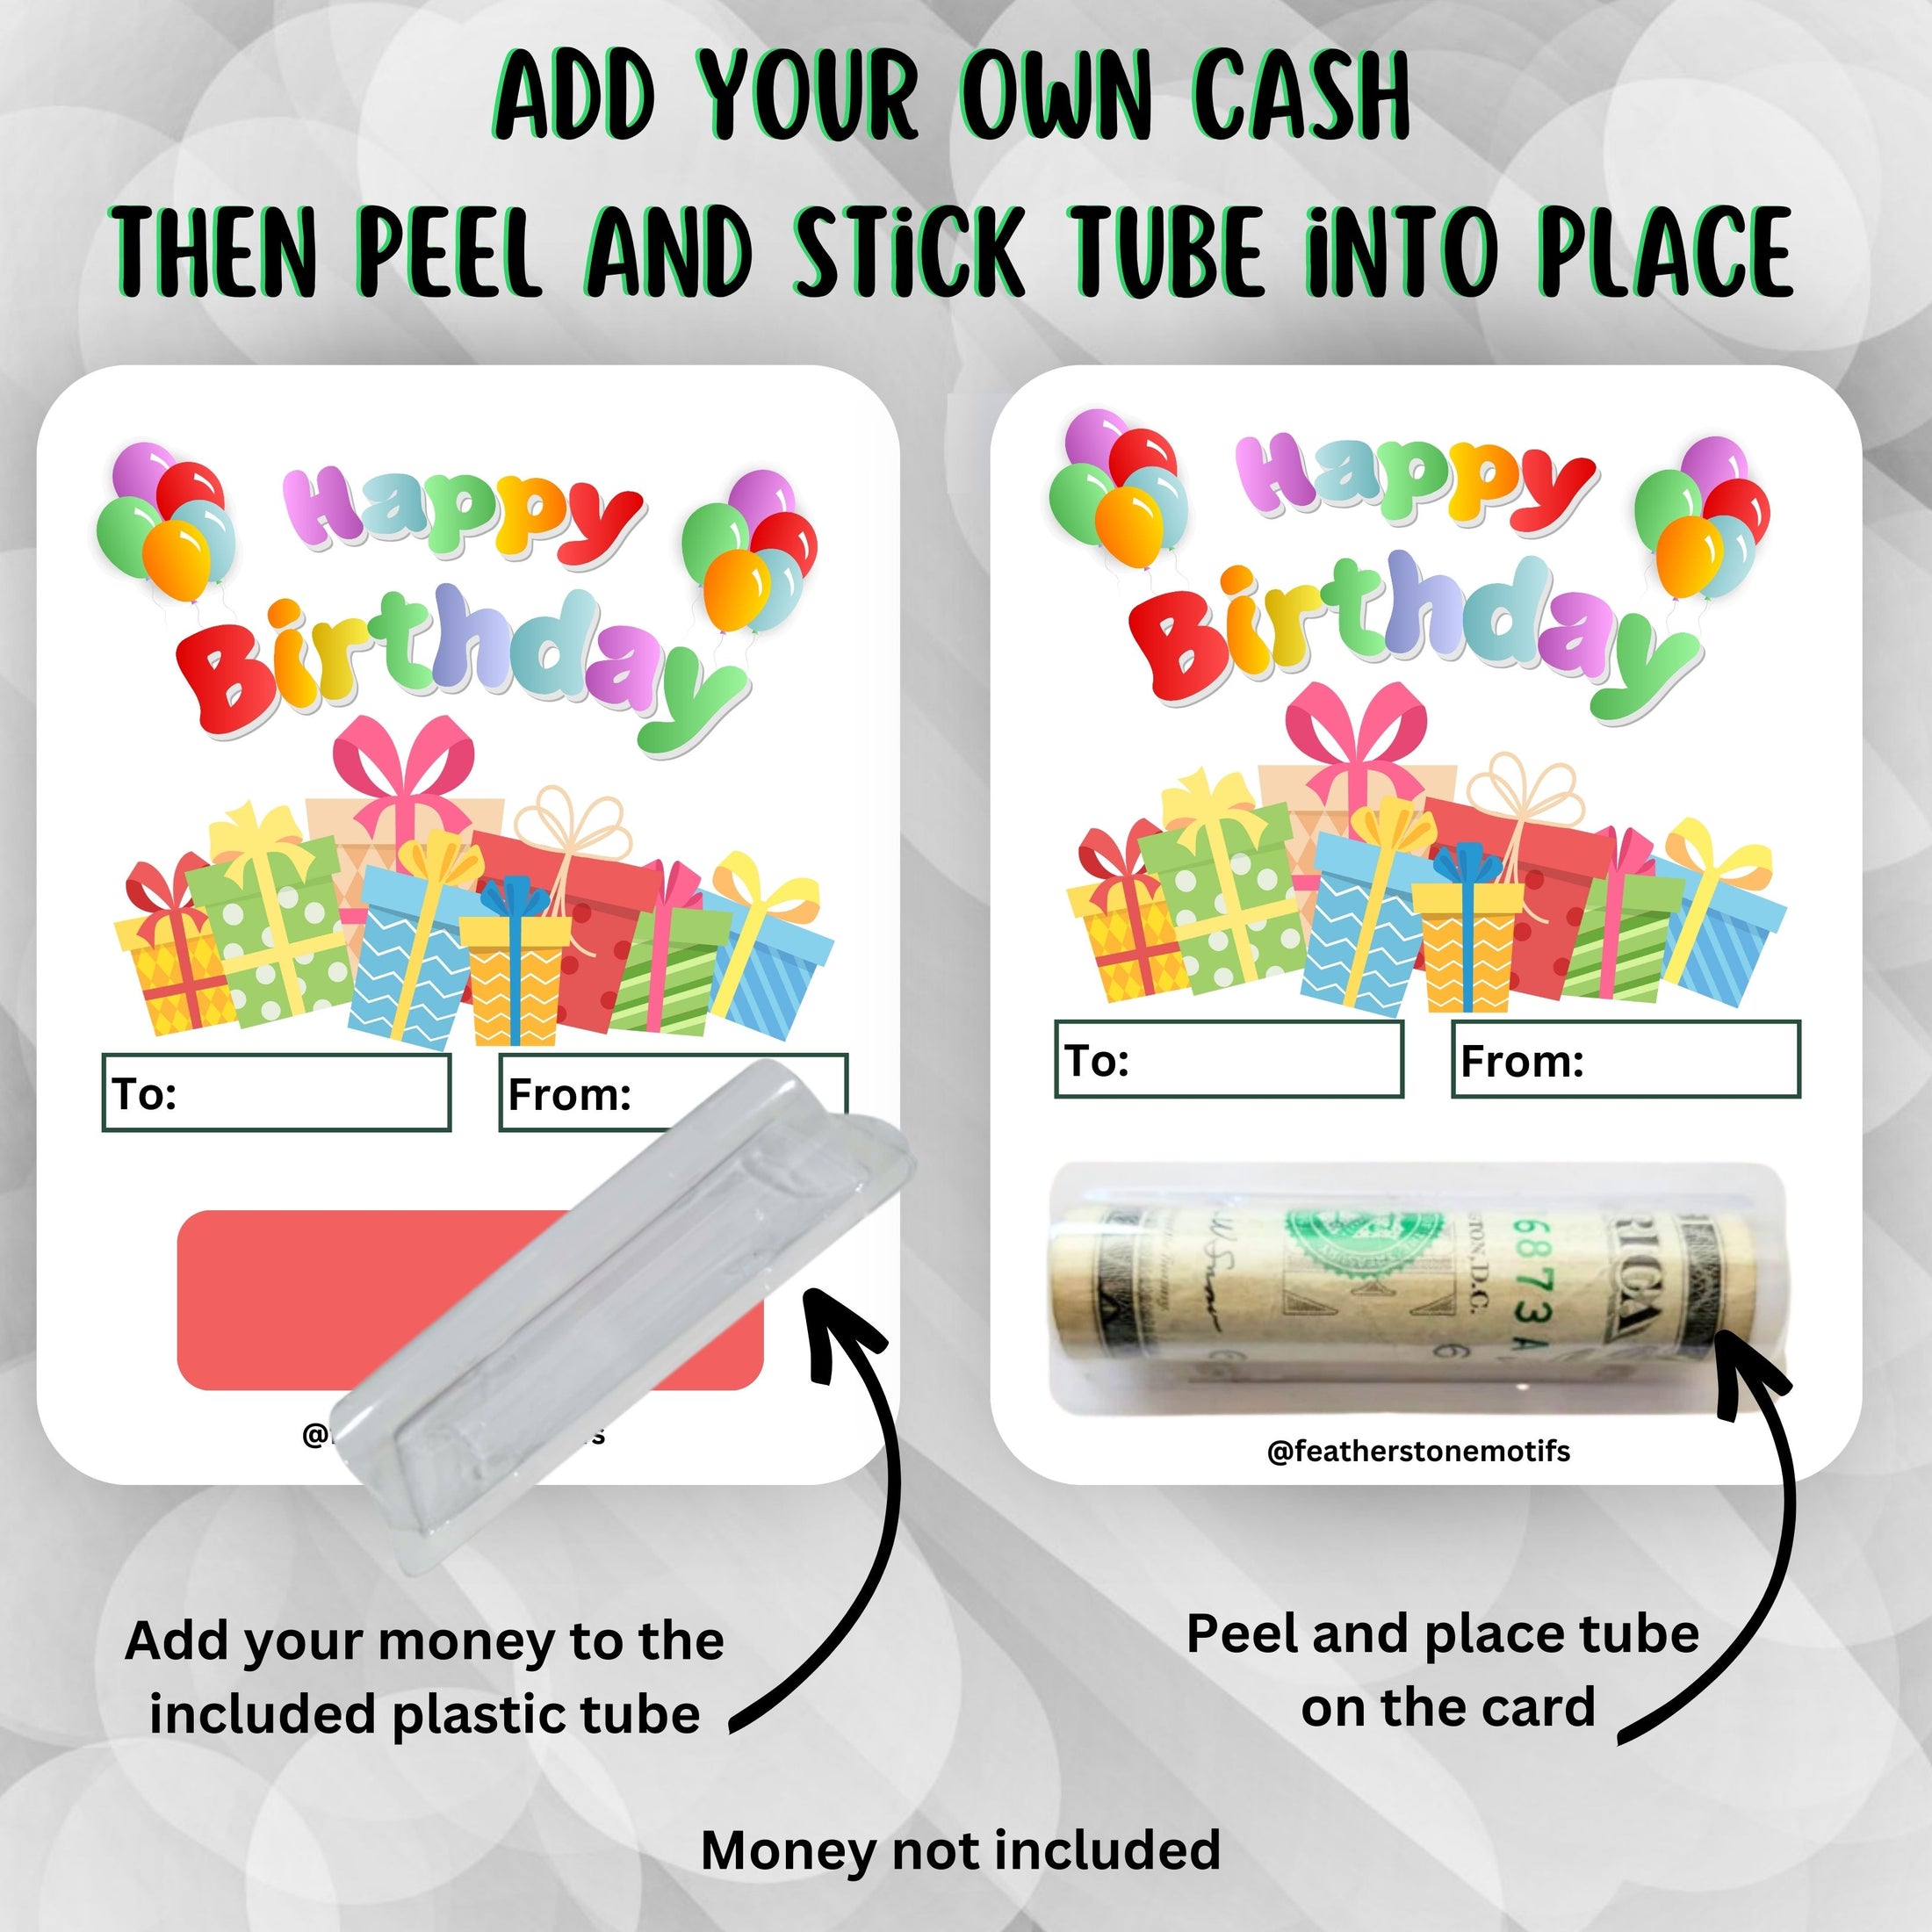 This image shows how to attach the money tube to the Birthday Presents Money Card.